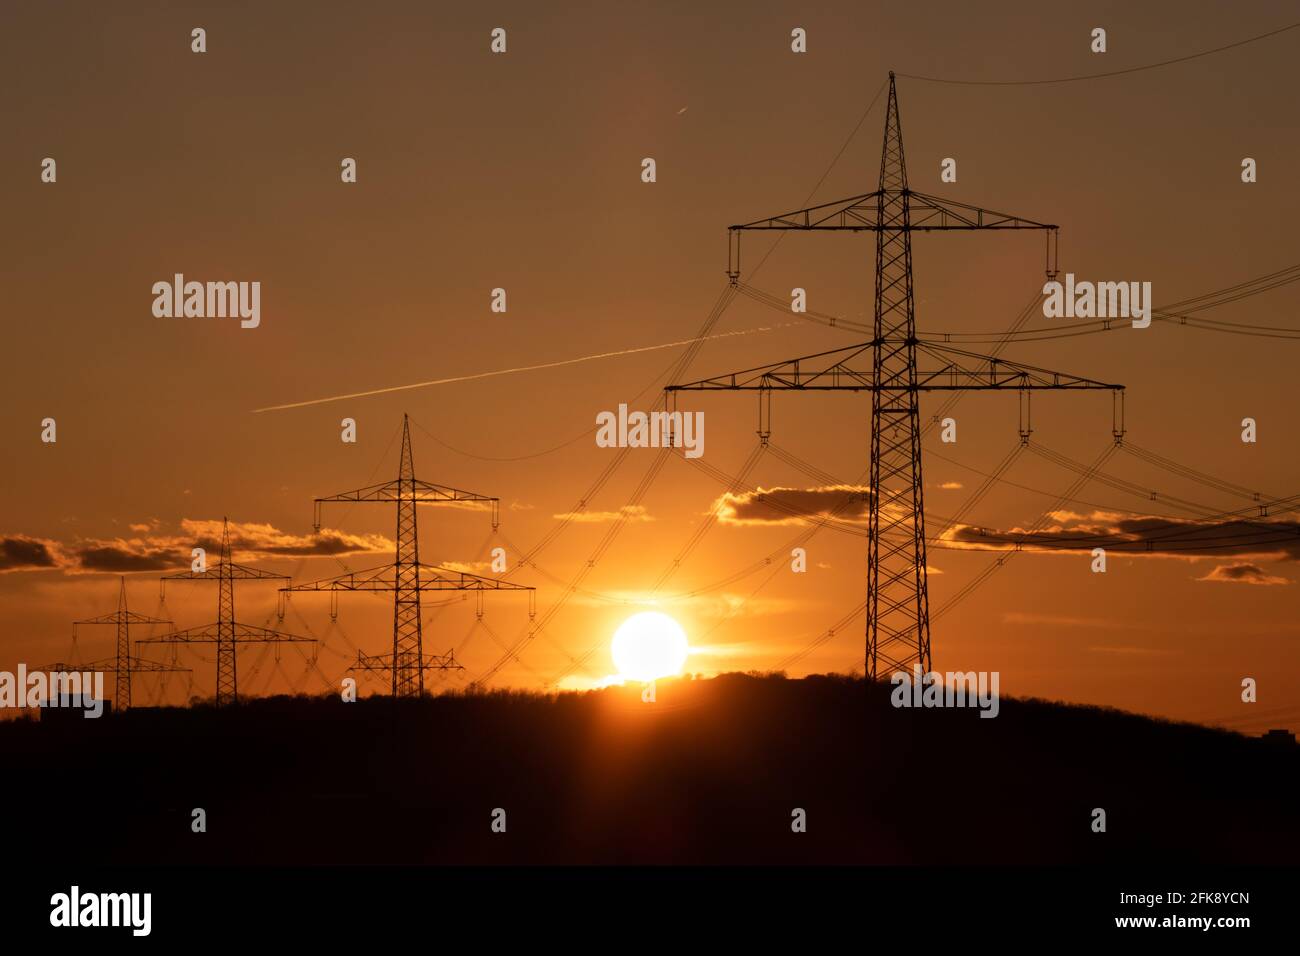 Electricity pylons with evening sun in the background. Stock Photo